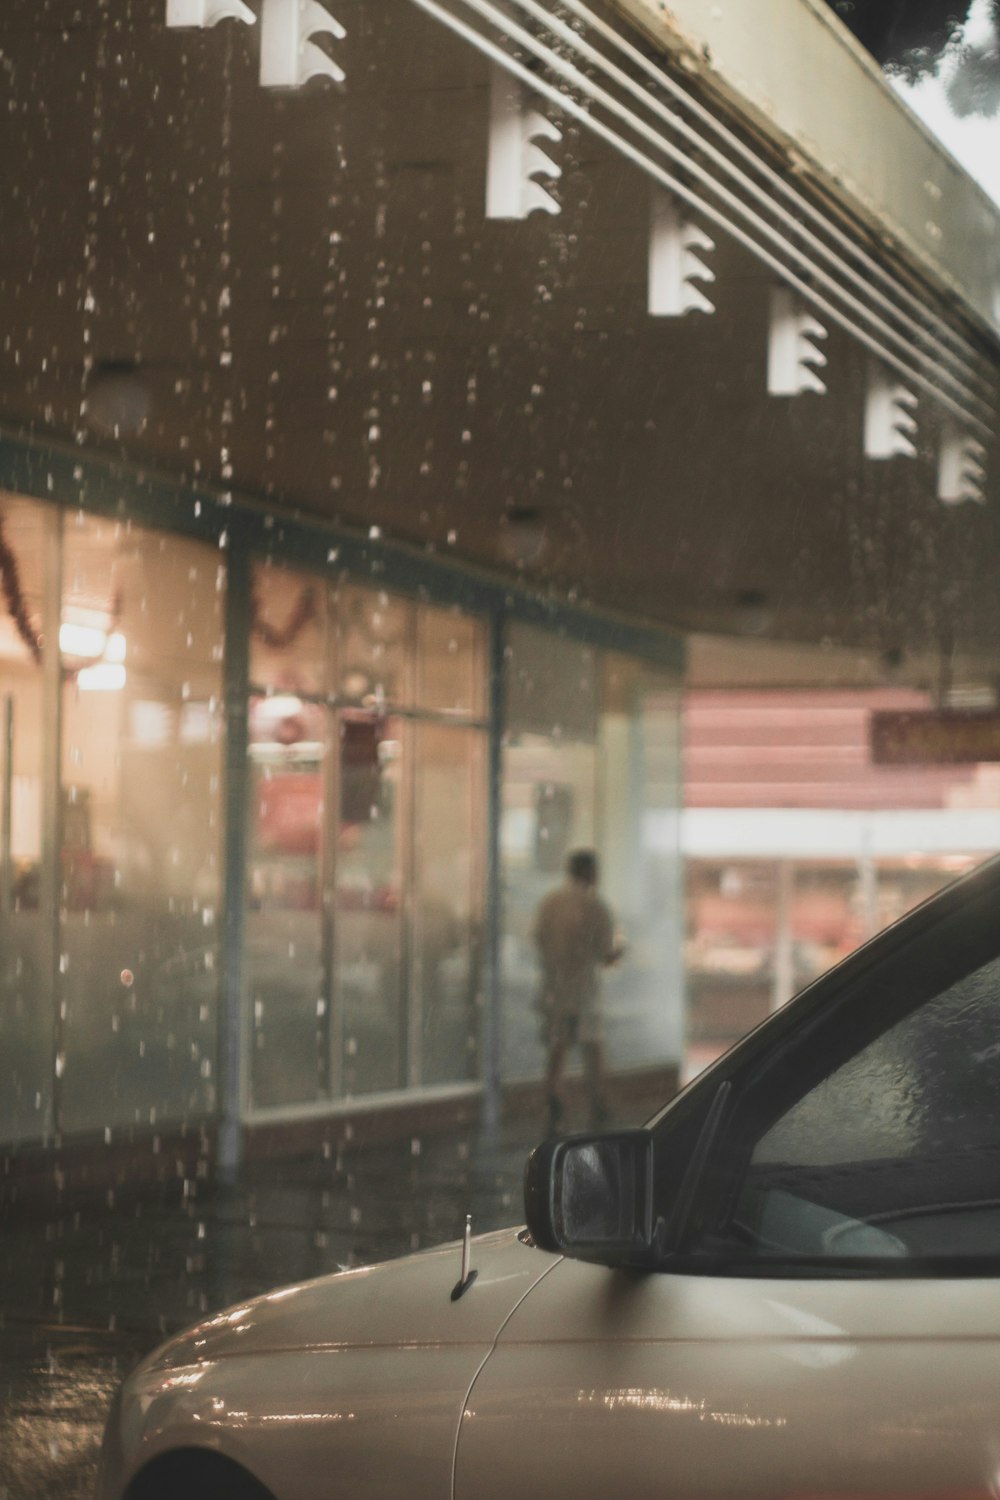 a car parked in front of a building on a rainy day